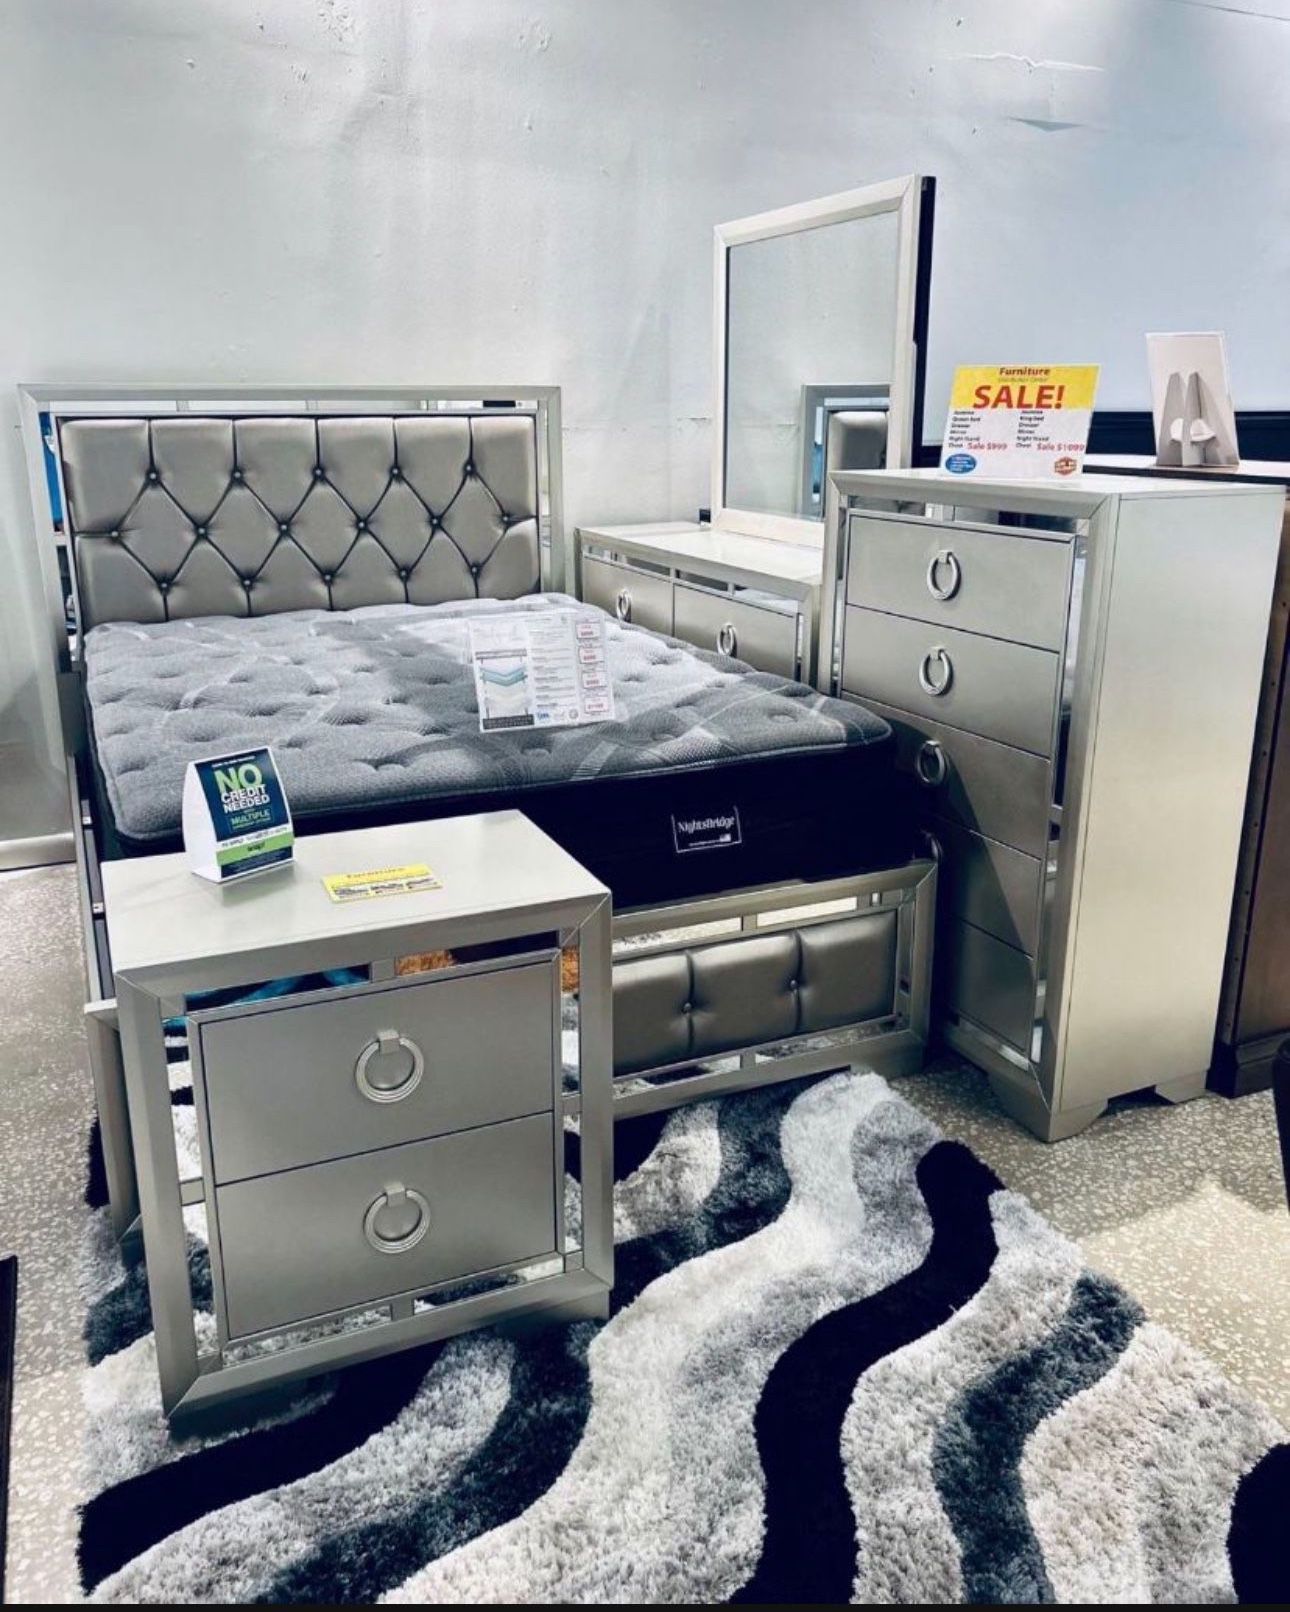 BEAUTIFUL NEW JASMINE QUEEN BEDROOM SET ON SALE ONLY $699. IN STOCK SAME DAY DELIVERY 🚚 EASY FINANCING 